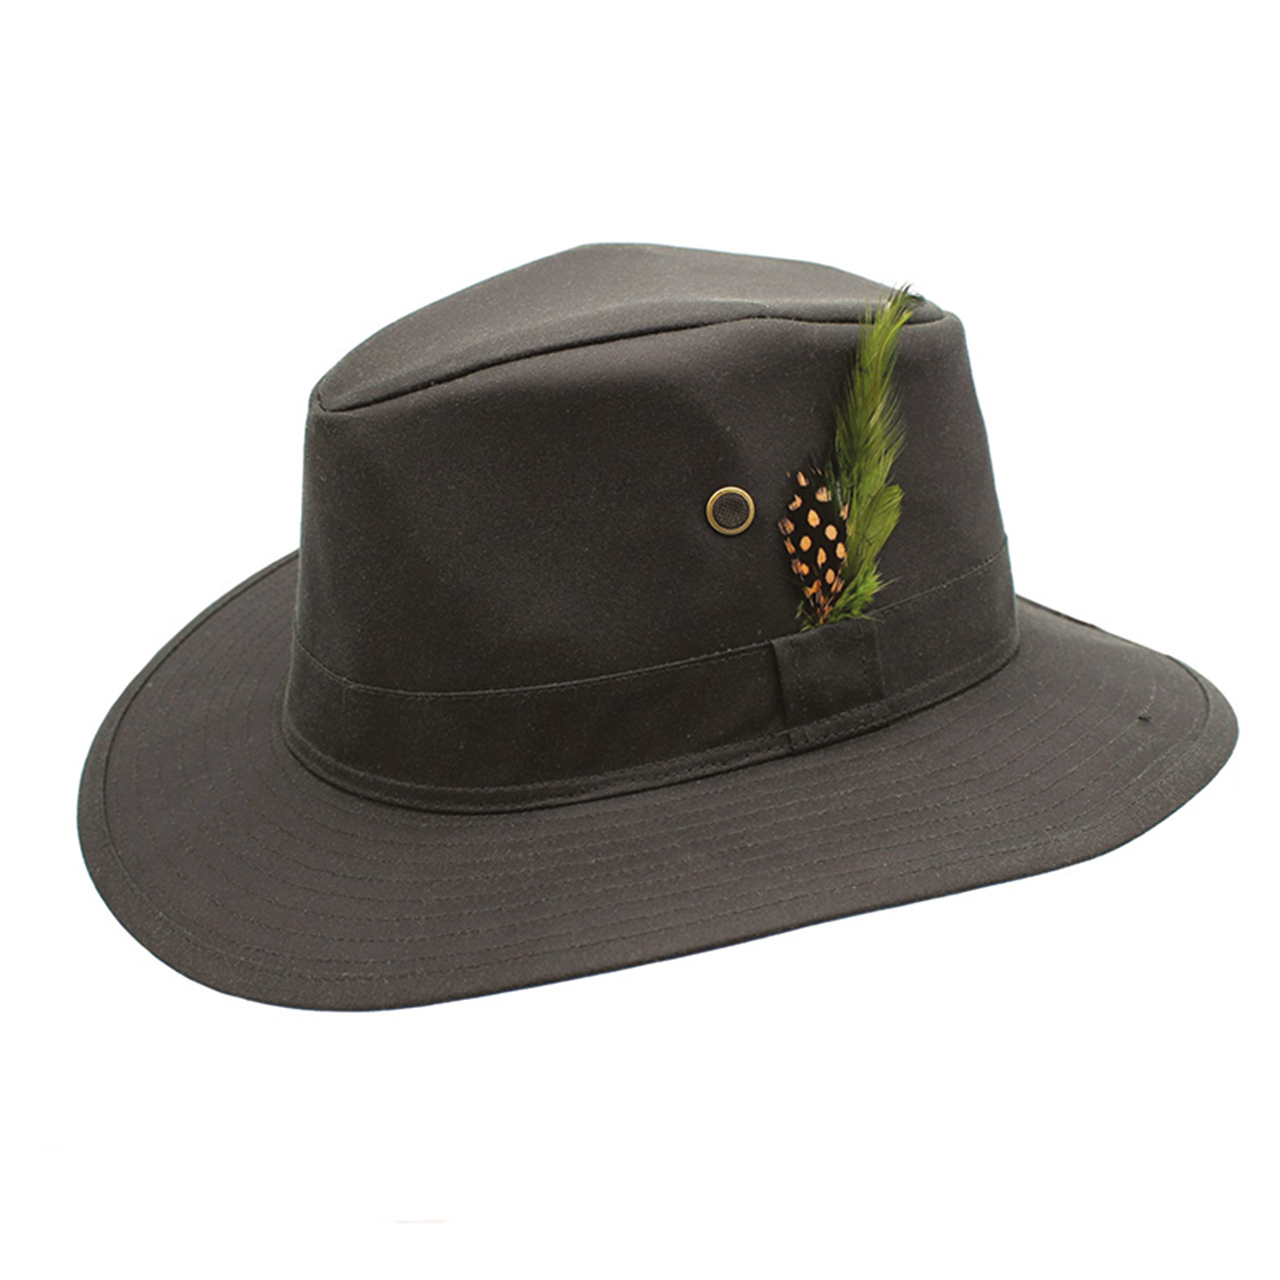 Waxed Cotton Trilby Rambler Hat